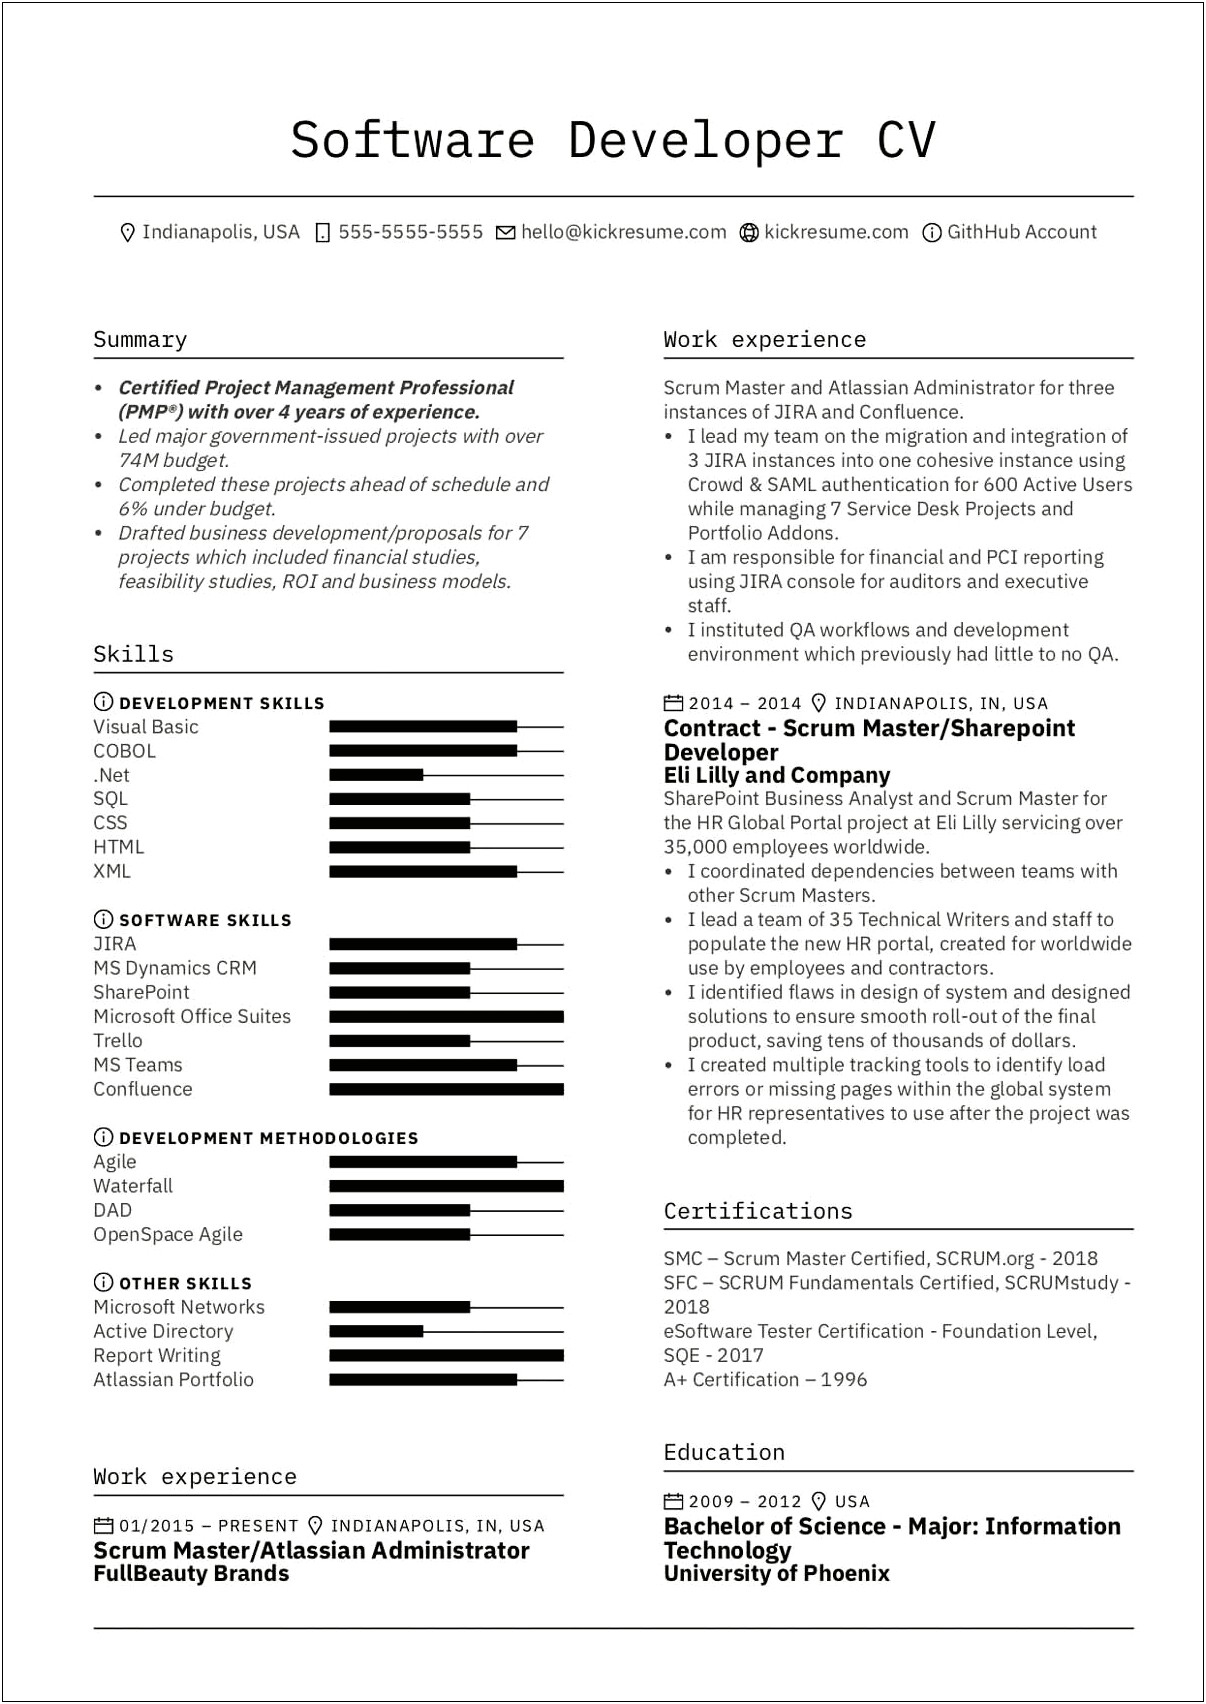 Sample Resume With Degree And Skills